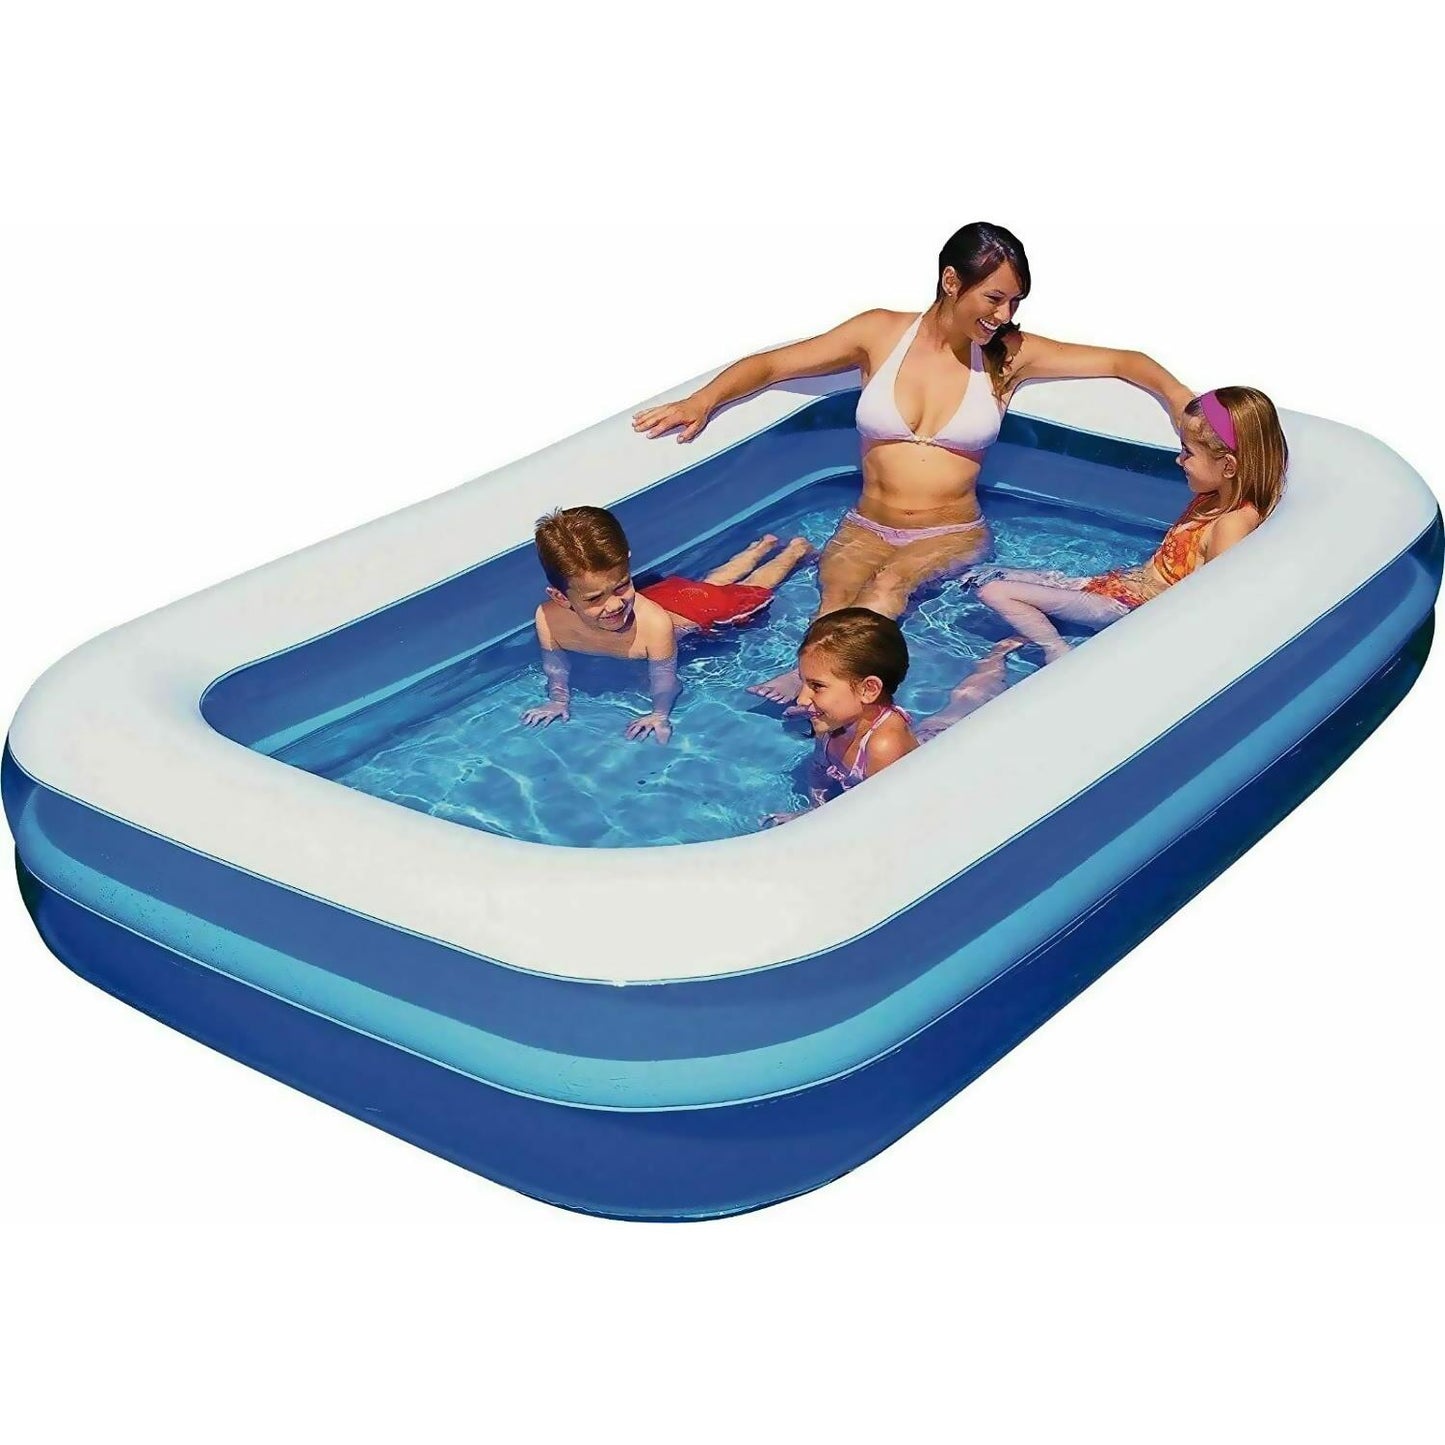 Enormous 2M x 1.5M Inflatable Swimming Pool for Family